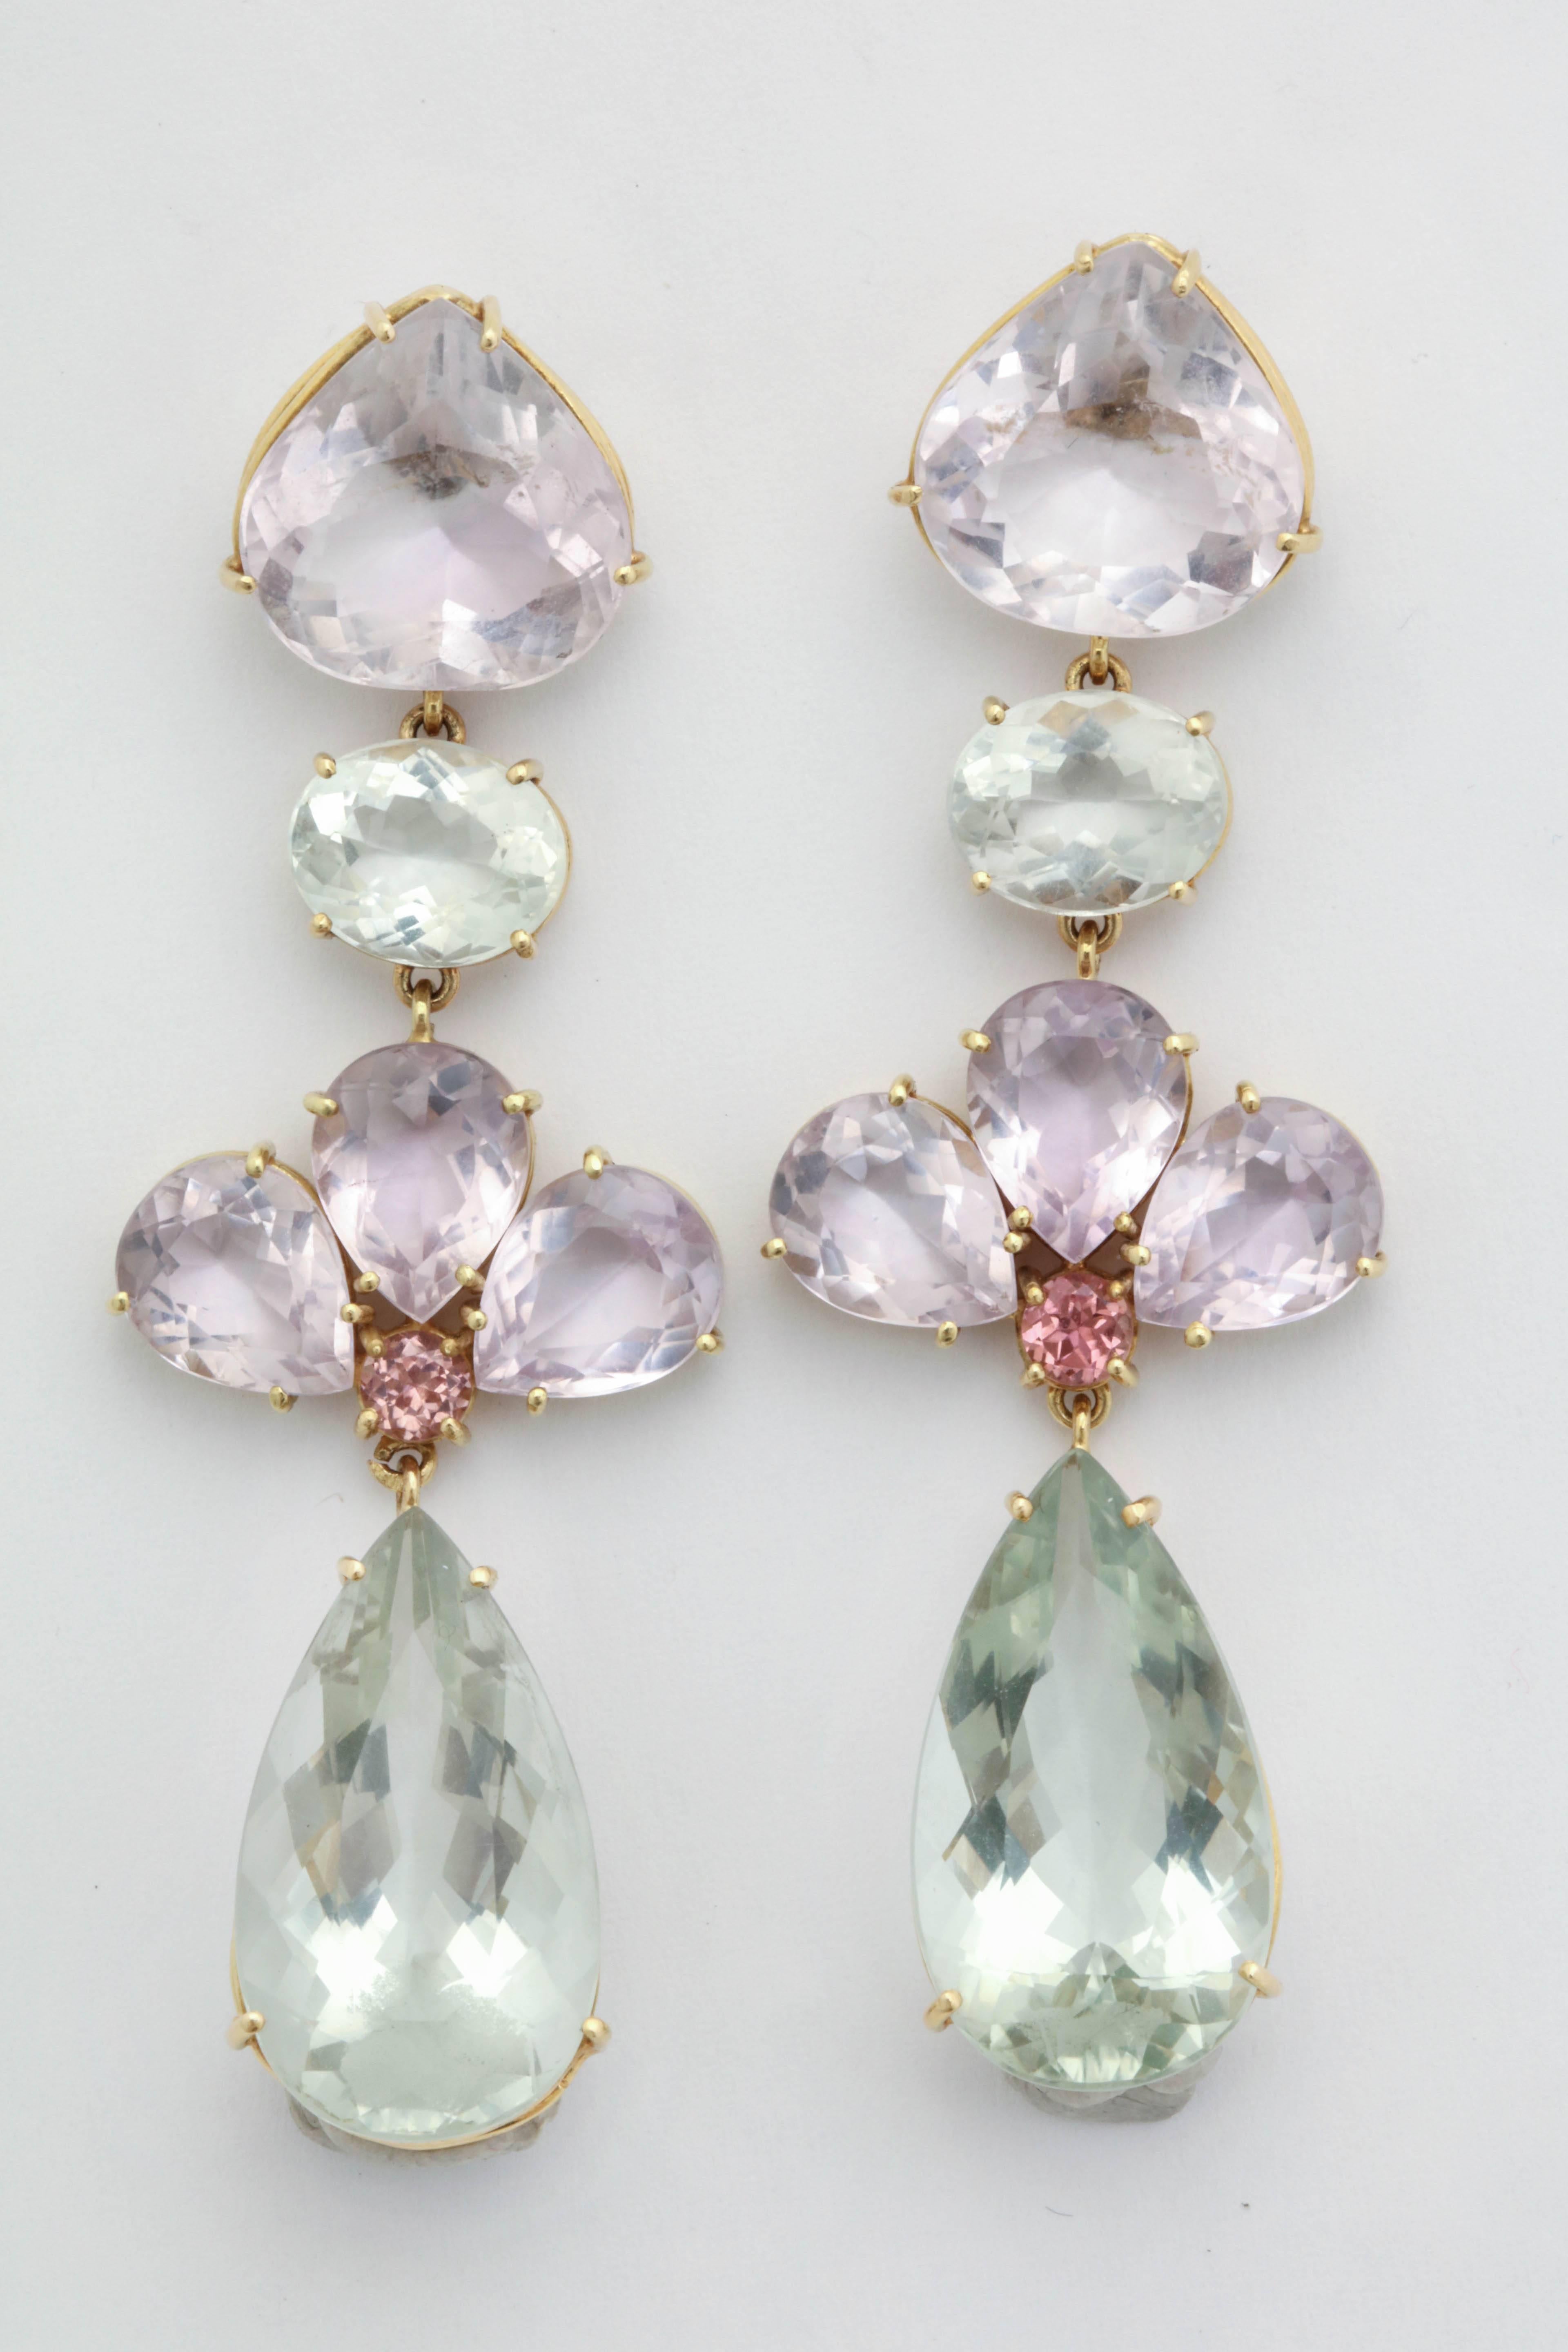 One Pair Of Ladies 18kt Yellow Gold Ear Pendant Earrings Embellished With 10 Pale Faceted Prong Set Pink Kunzite And Further Designed With Two Large Prong Set Pear Shaped Green Quartz Stones Measuring Approximately 10 Carats Total Weight.NOTE: For